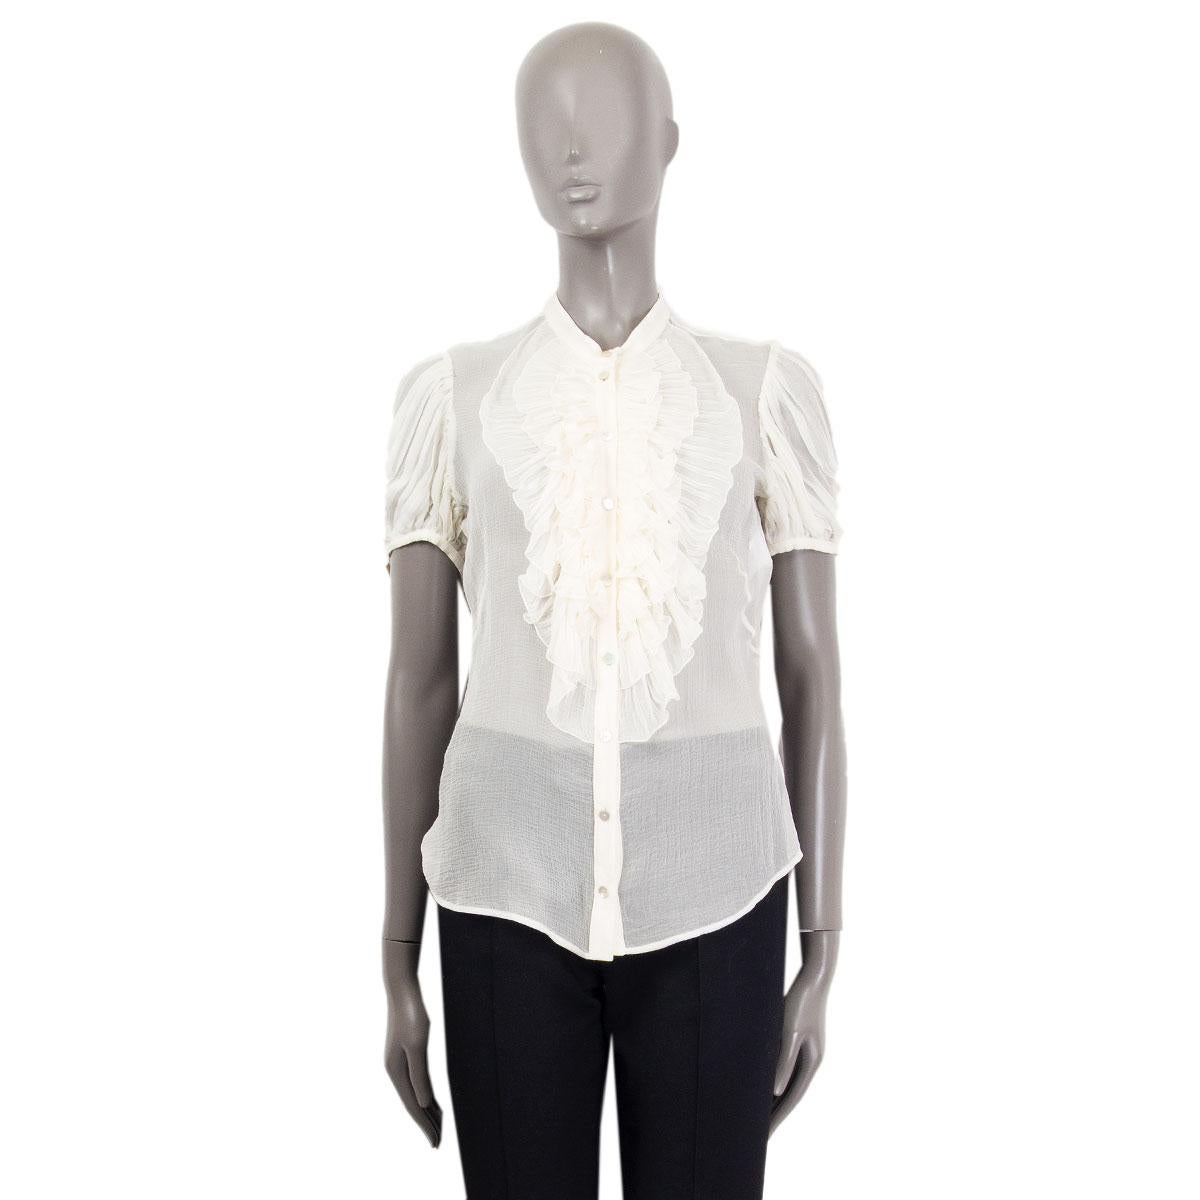 Alexander McQueen ruffled sheer button-up blouse in off-white silk (100%) with gahtered puff short-sleeves. Front is slightly longer than the back. Has been worn and is in excellent condition. 

Tag Size 44
Size L
Shoulder Width 39cm (15.2in)
Bust